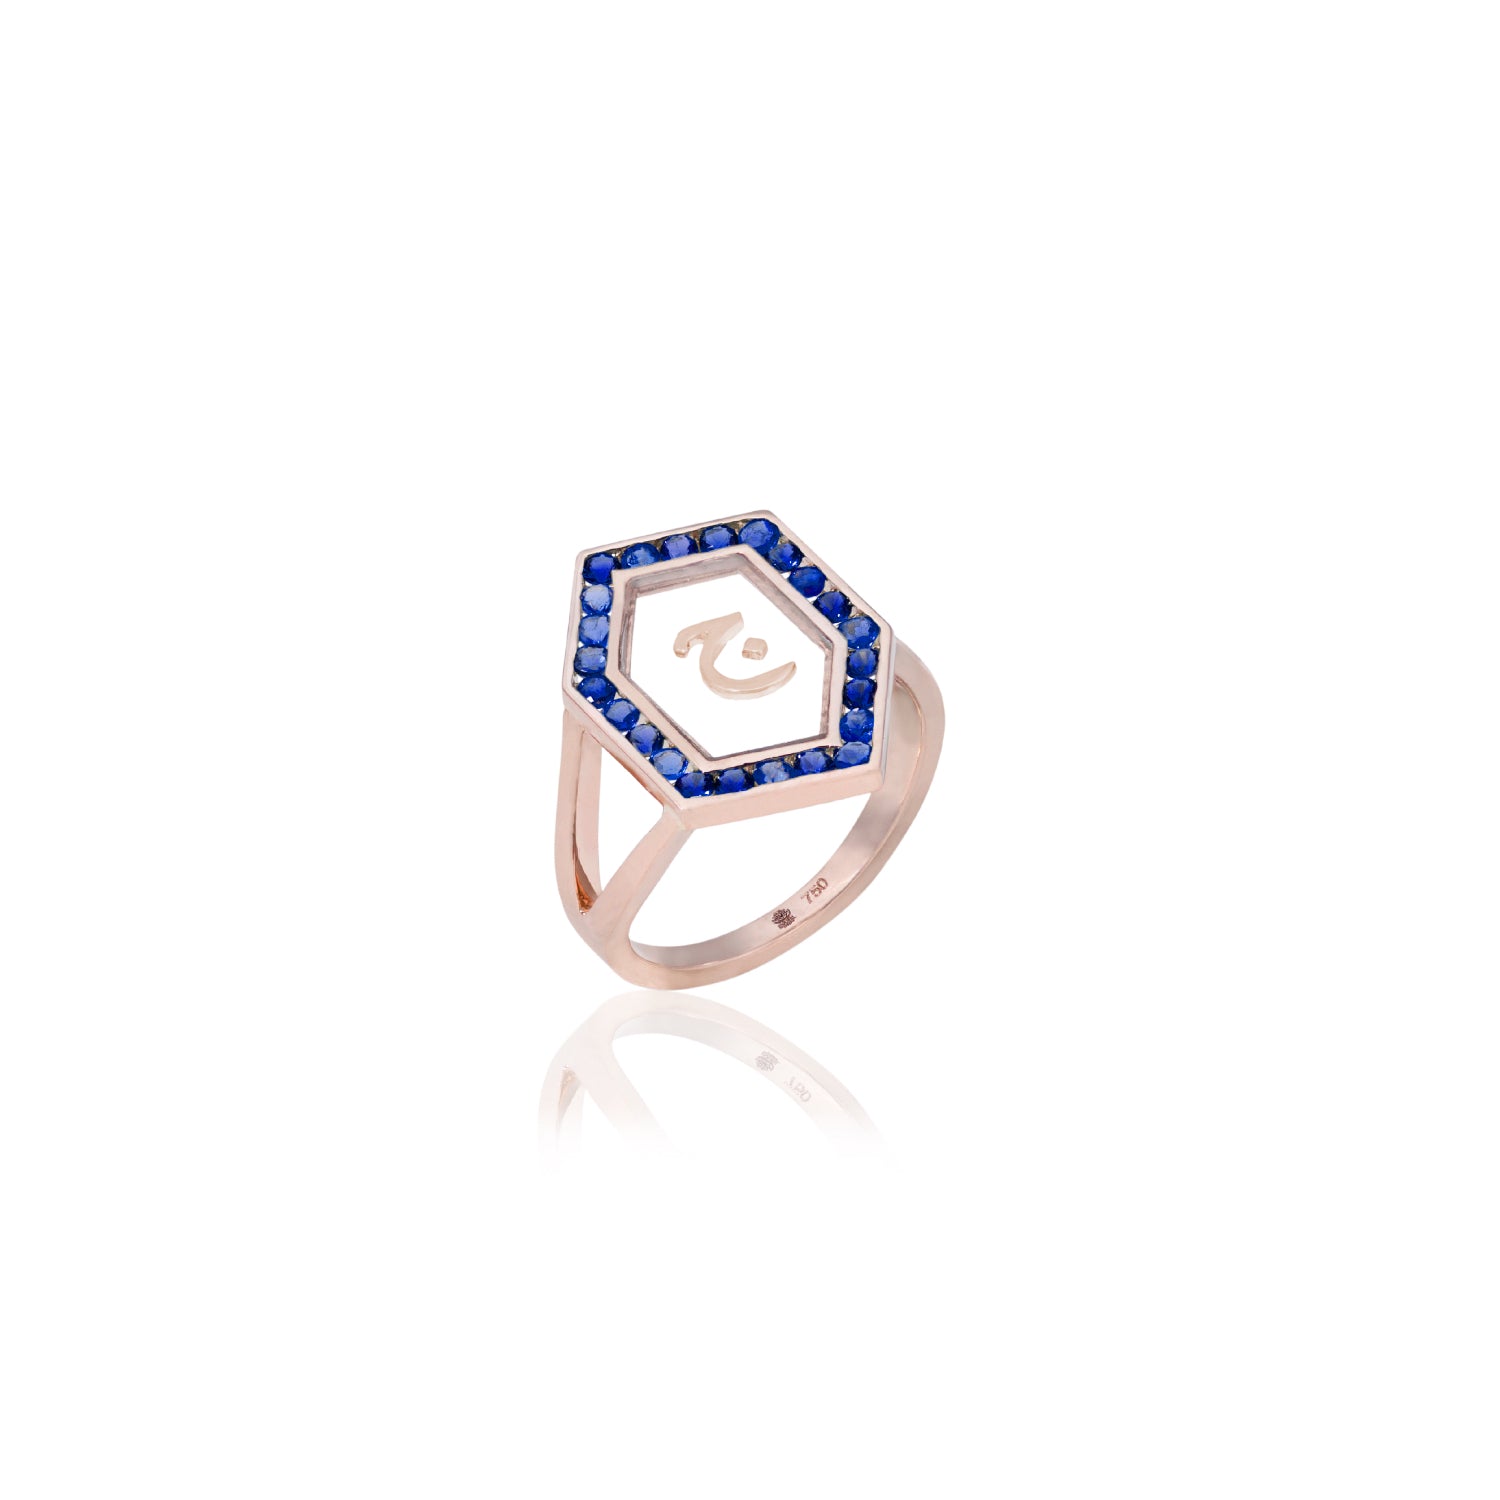 Qamoos 1.0 Letter ج Sapphire Ring in Rose Gold